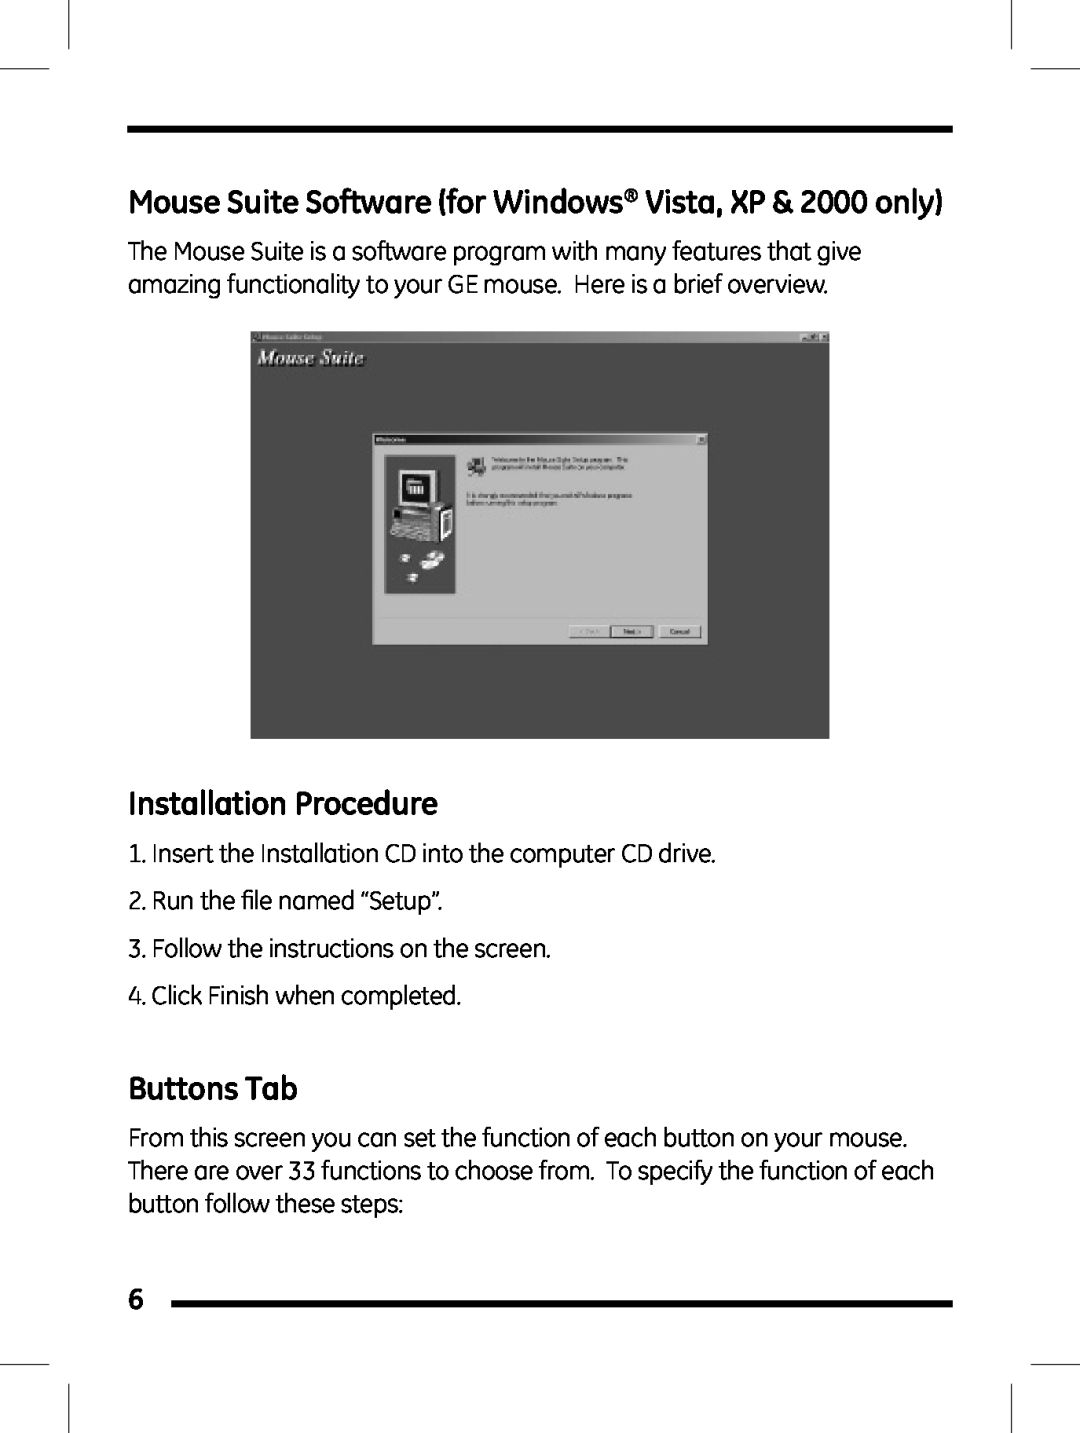 Jasco 98505 instruction manual Mouse Suite Software for Windows Vista, XP & 2000 only, Installation Procedure, Buttons Tab 